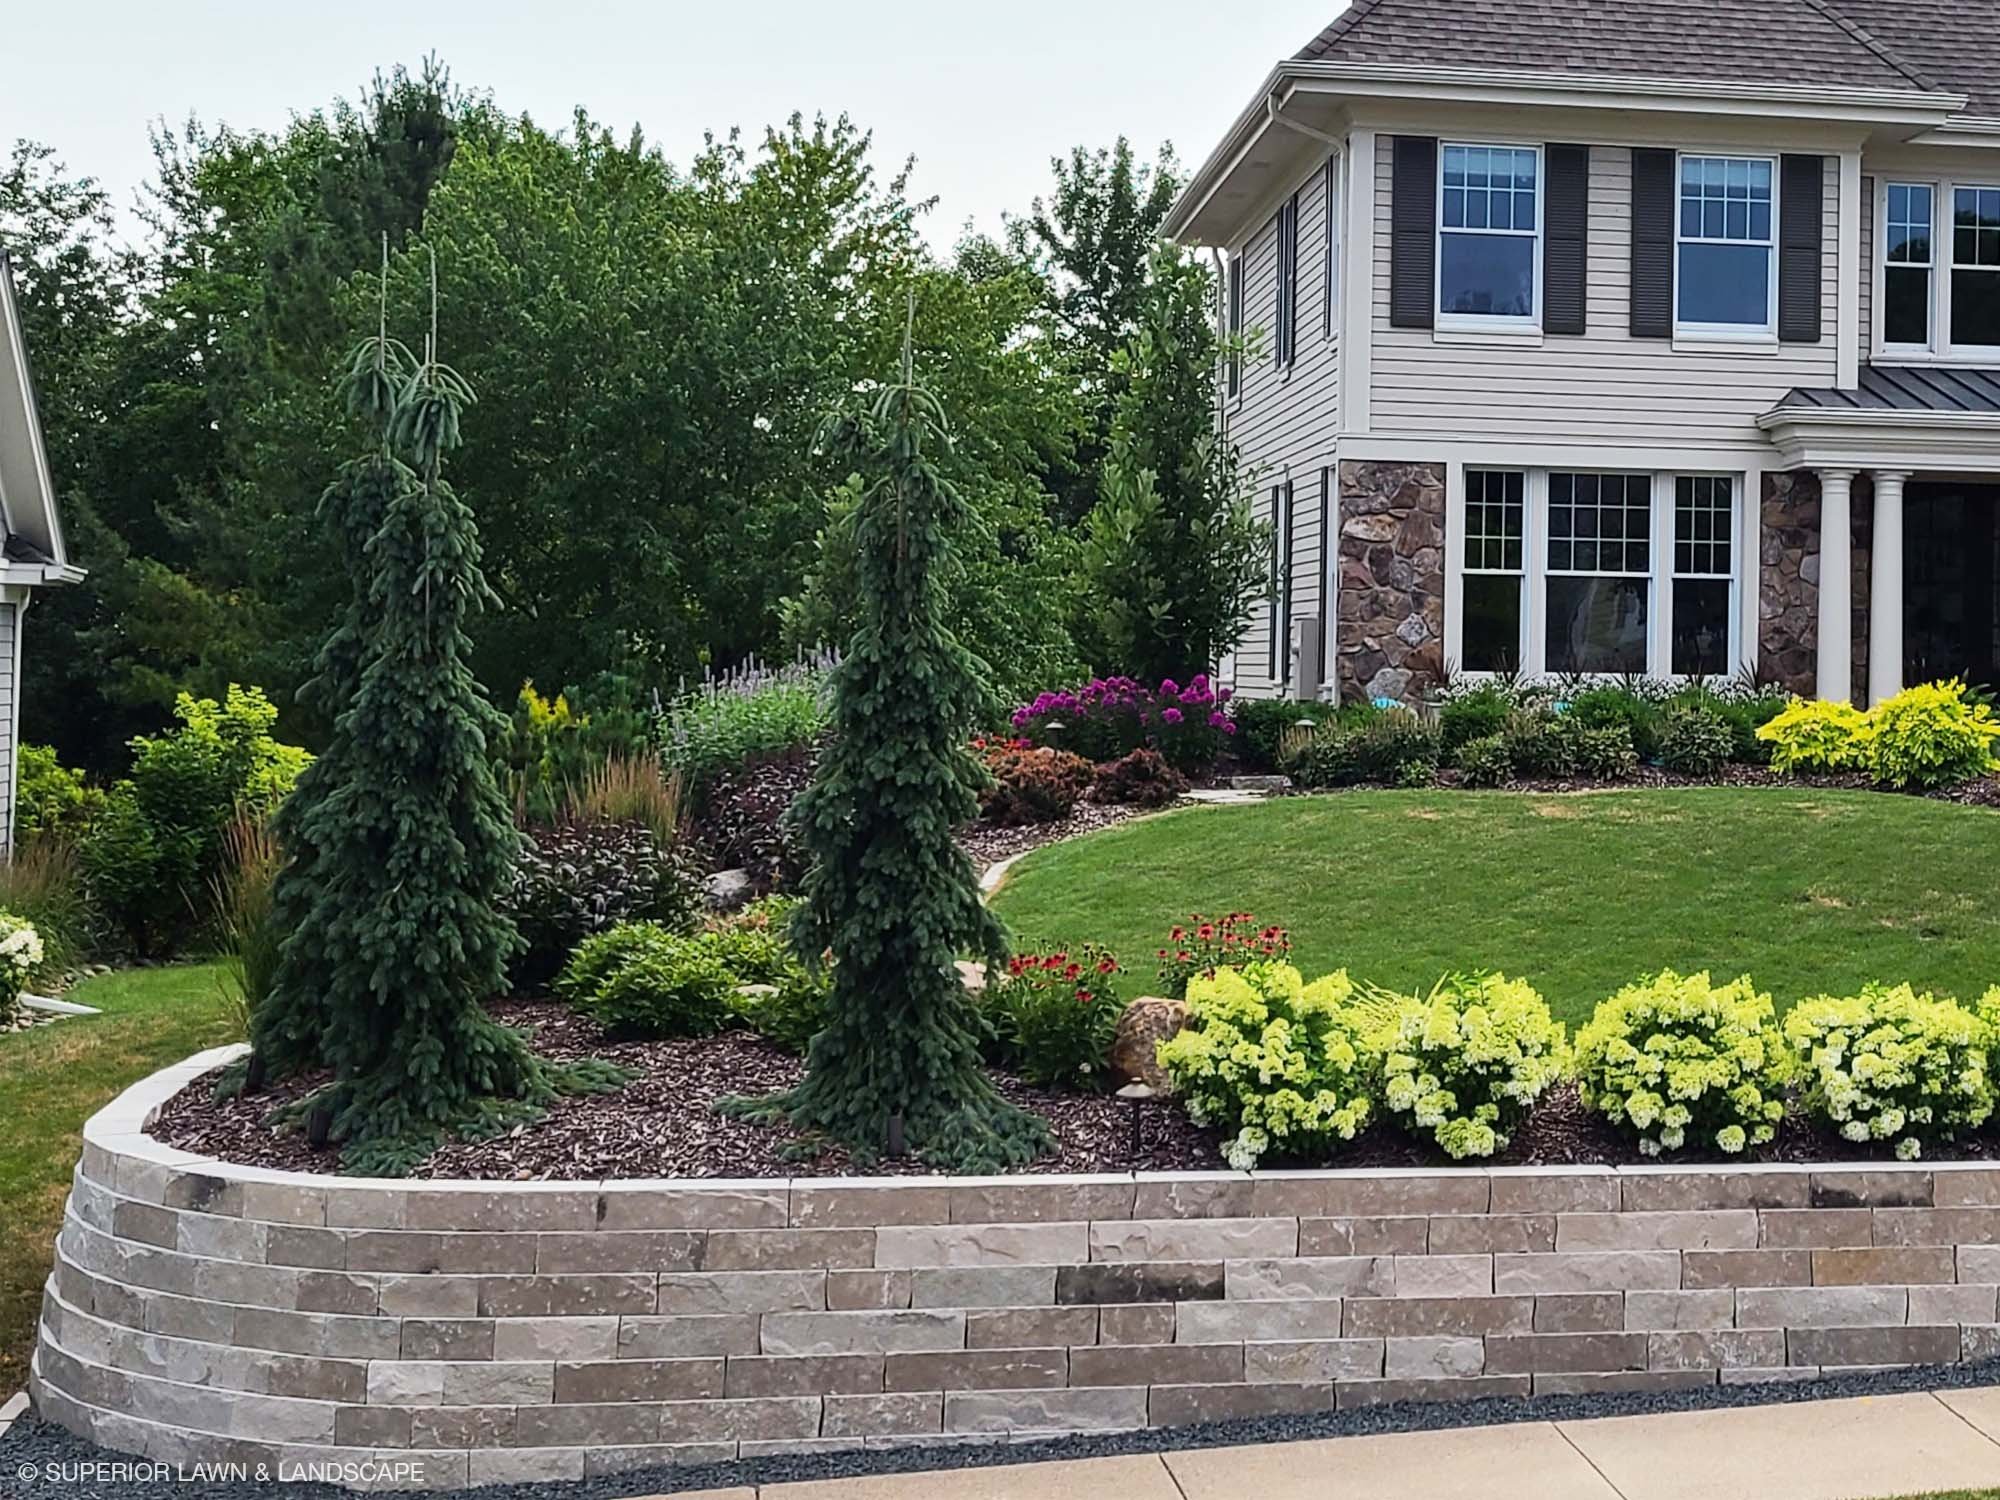 superior-lawn-landscape-retaining-walls-046-stone-trees-and-shrubs.jpg